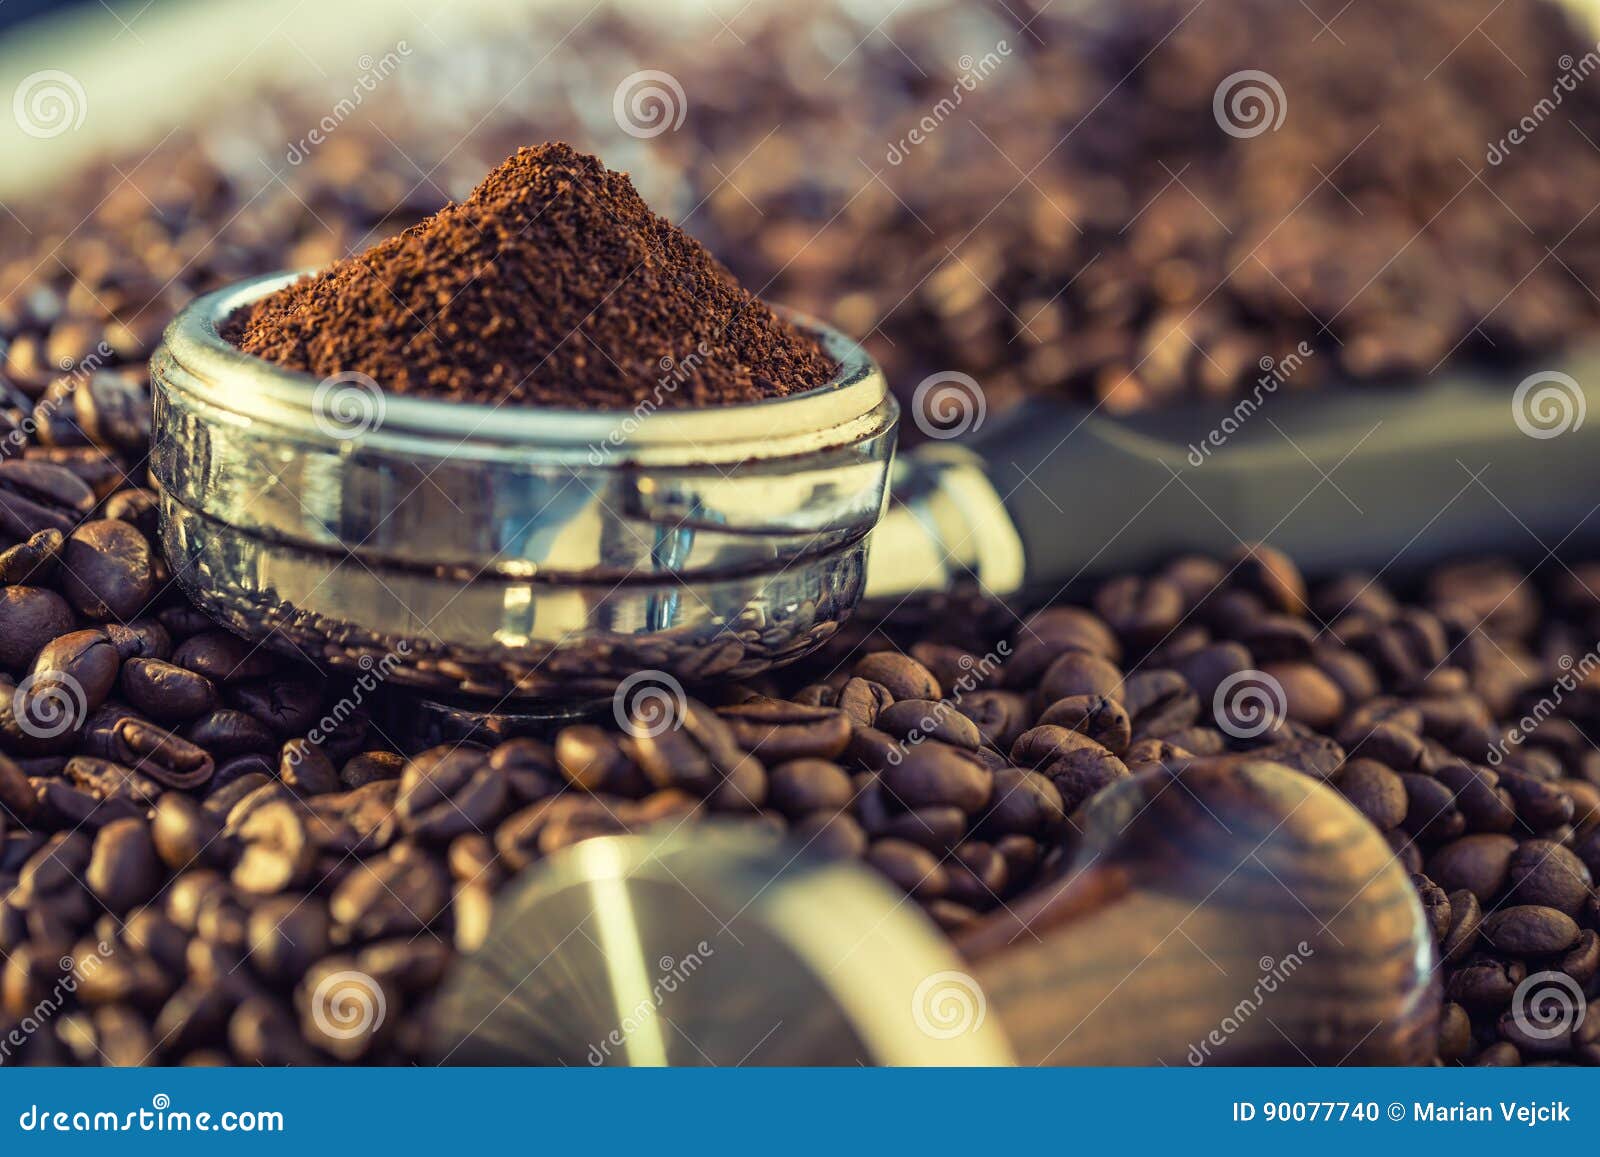 coffee.coffee beans. coffee beans and portafilter. toned image